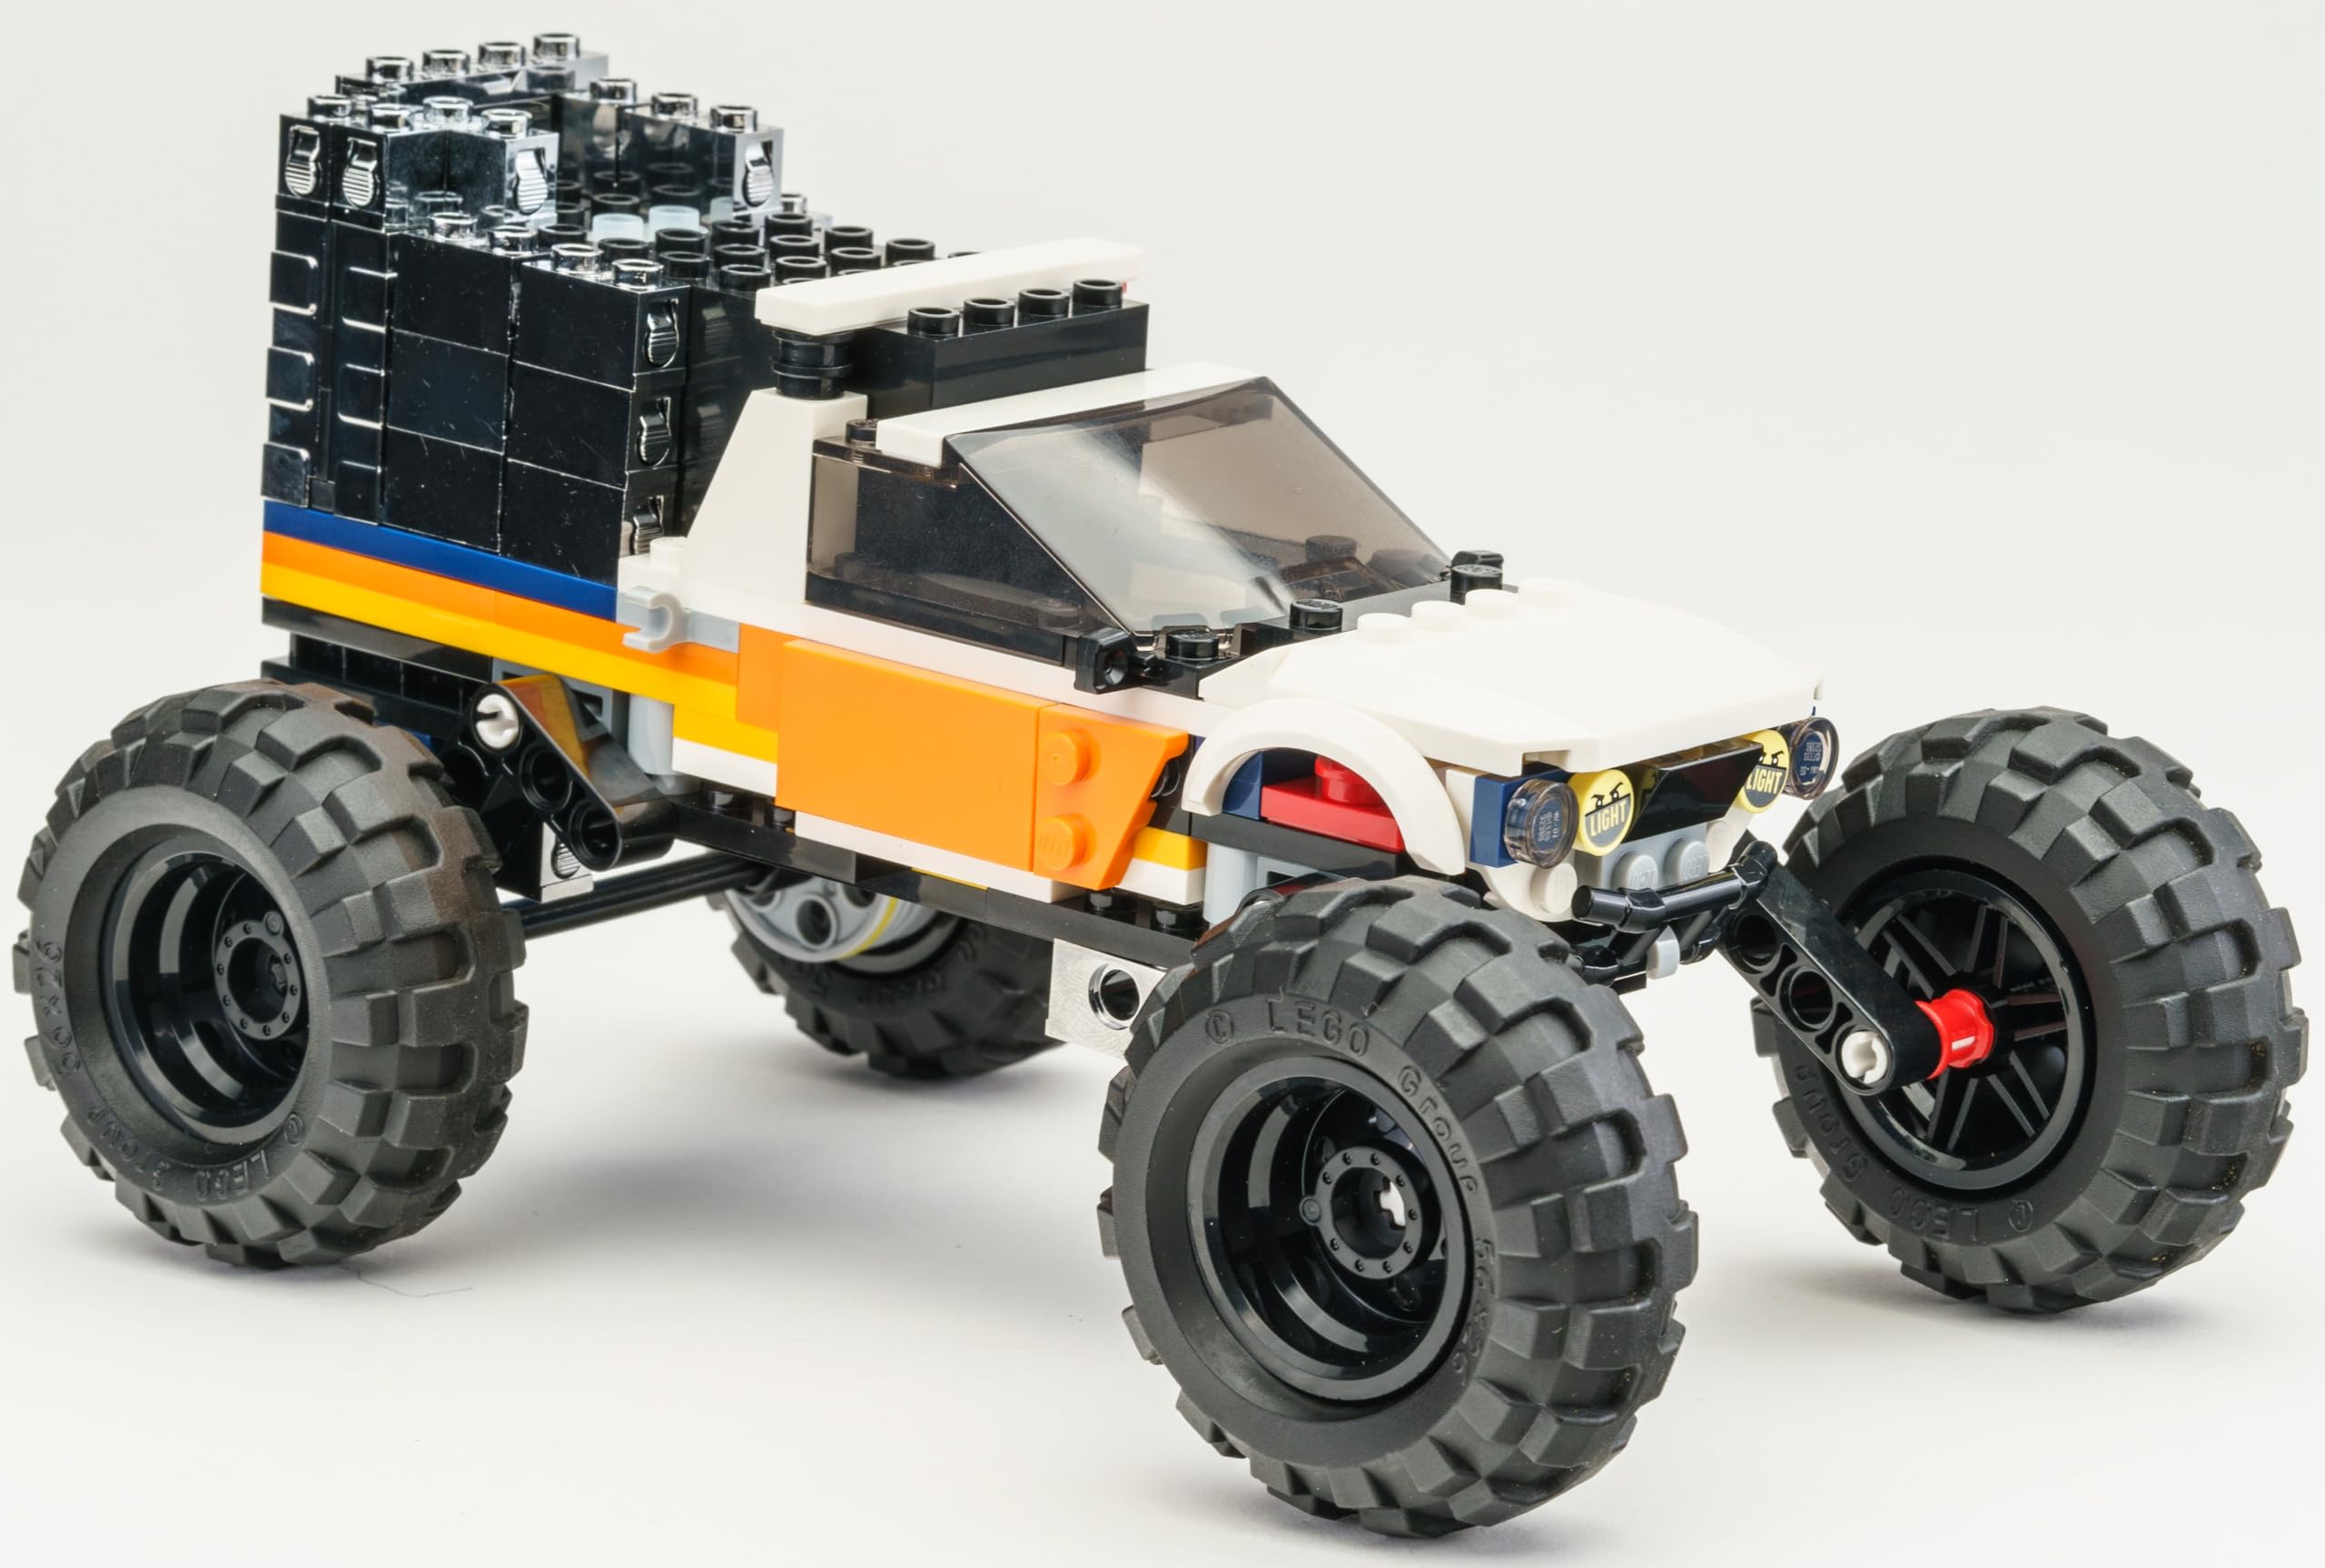 Dakott Conductive Chrome-Plated Building Bricks Kit for LegoCity 4x4 Off-Roader Truck. Compatible with 60378 Model. Not Include The Set. Bring Life to Your LegoCity 4x4 Off-Roader.